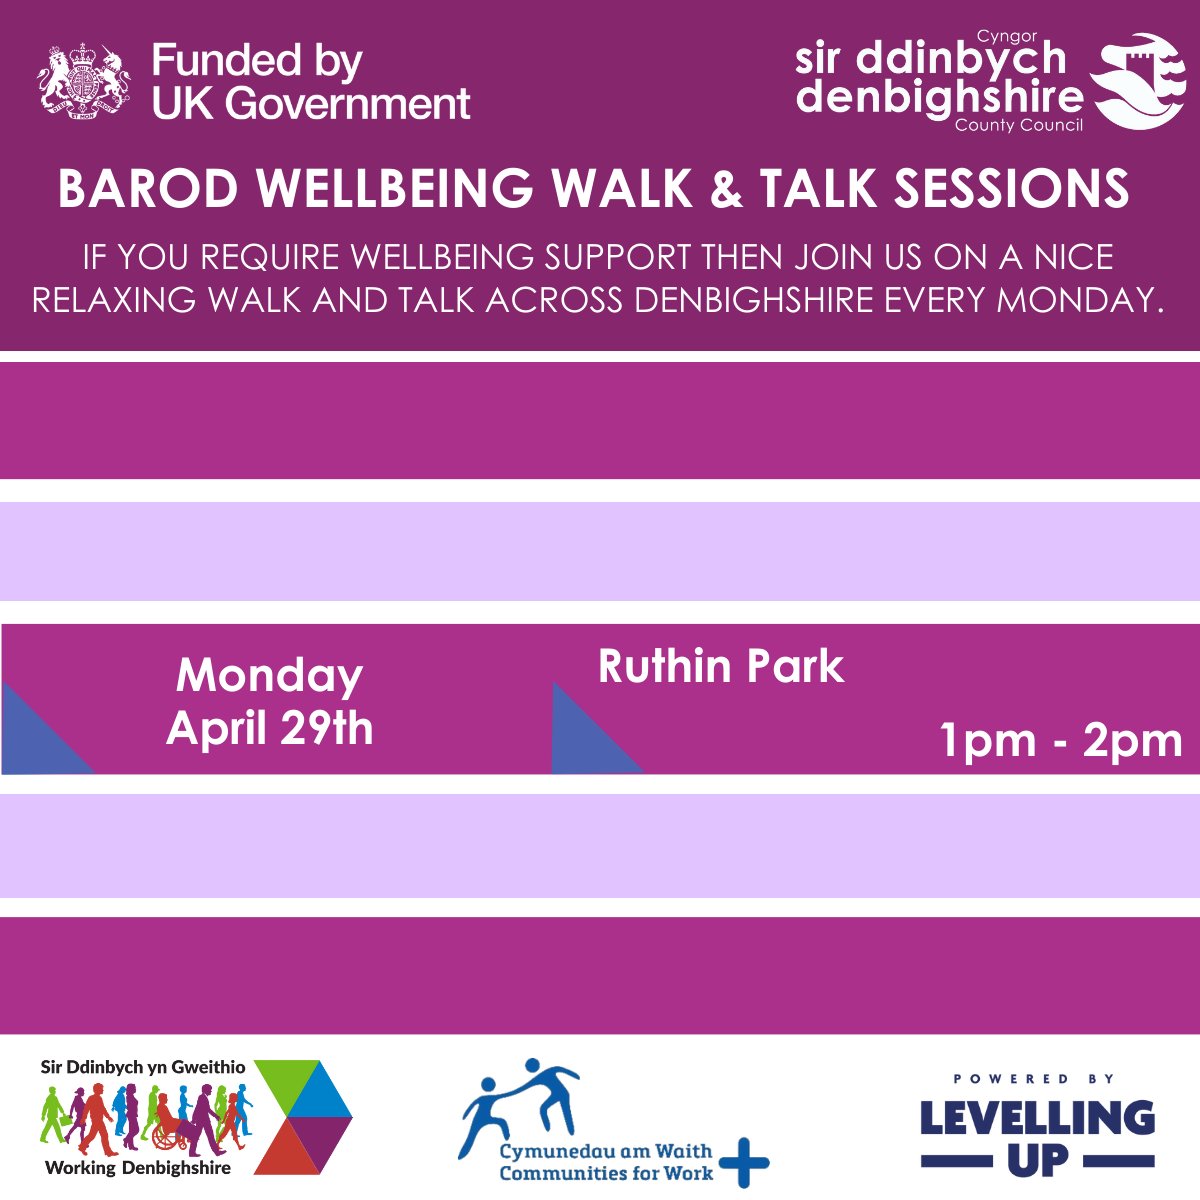 If you live in Denbighshire and are struggling with your wellbeing, come and talk to our Barod team whilst enjoying a relaxing walk 🚶 🌳 💛 Whether you need advice or ongoing support, our friendly team are here to help. To find more Barod events visit: denjobs.org/calendar-2/